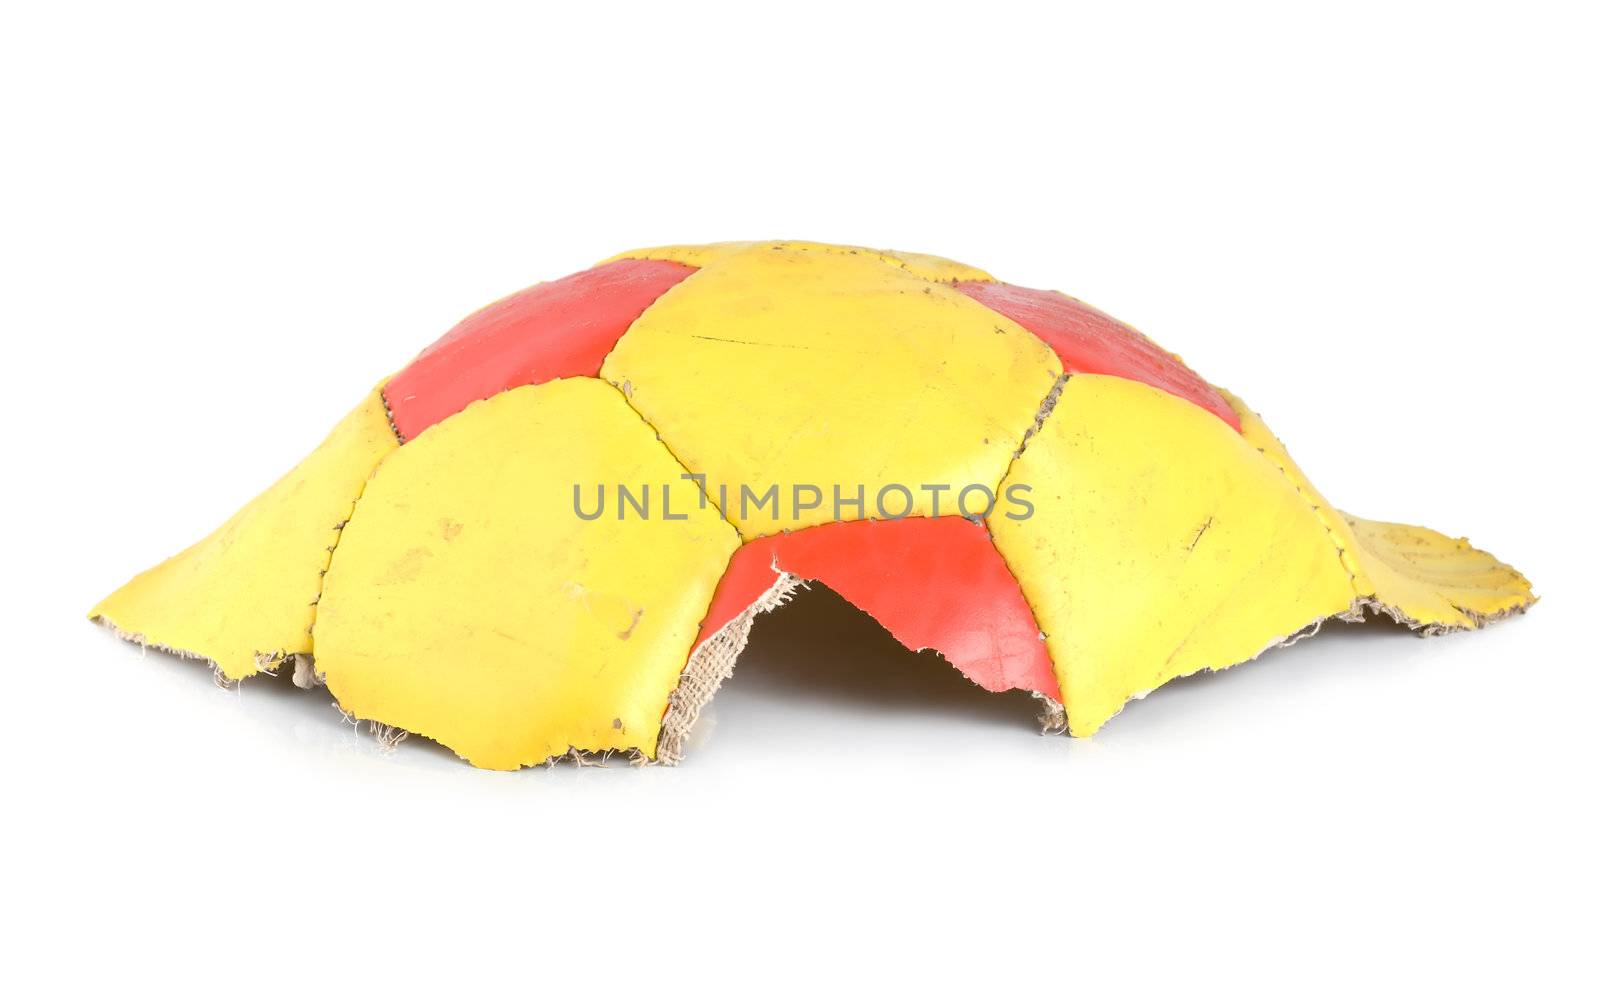 Part of the old soccer isolated on white background